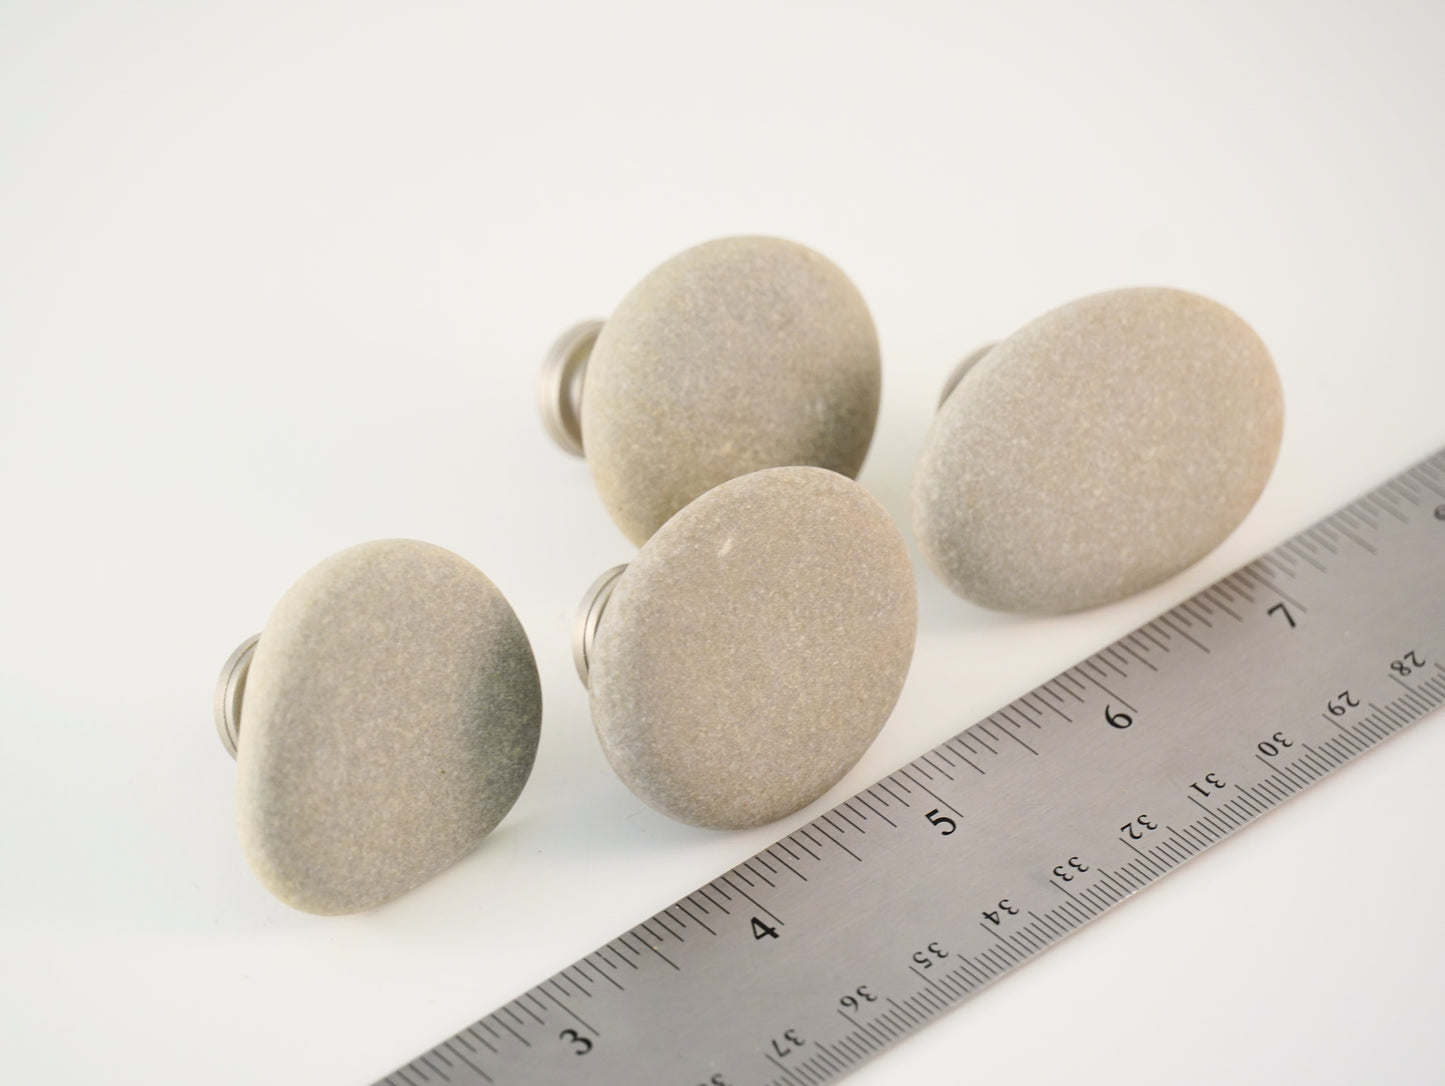 Beach Rock Stone Pebble Cabinet Knobs - Set of 4 - Ready to Ship